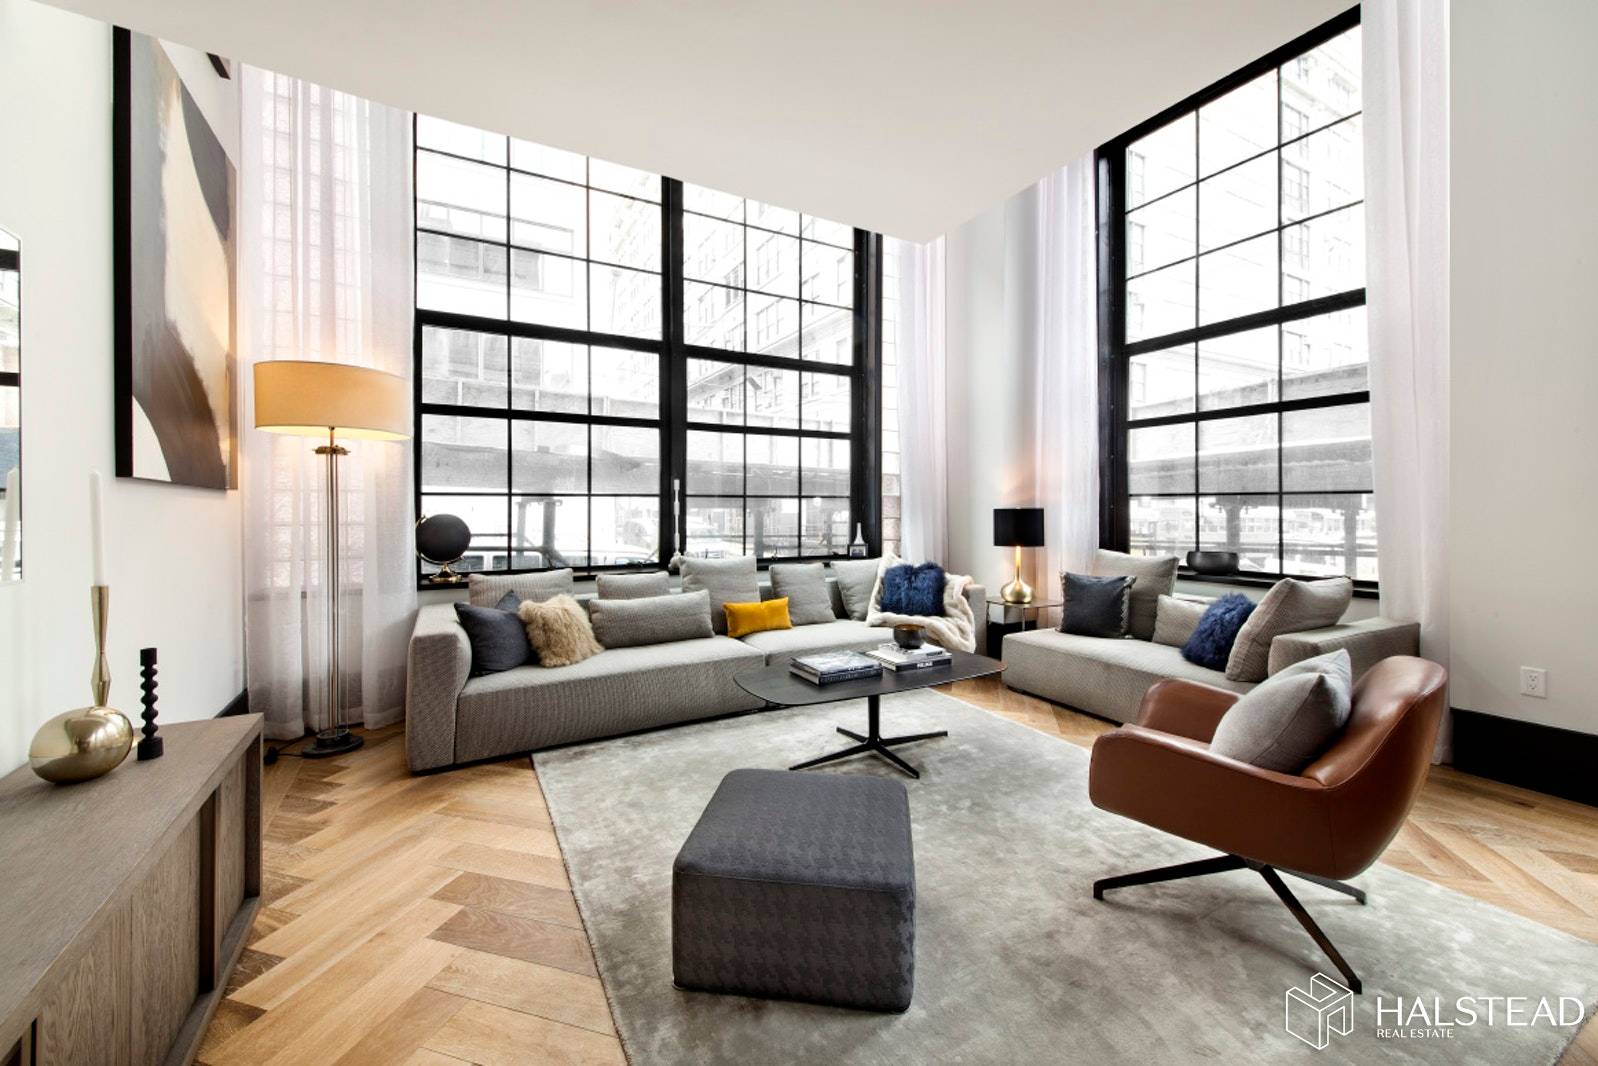 Designed by acclaimed architecture firm ODA, 51 Jay Street sets a new standard for living in DUMBO.